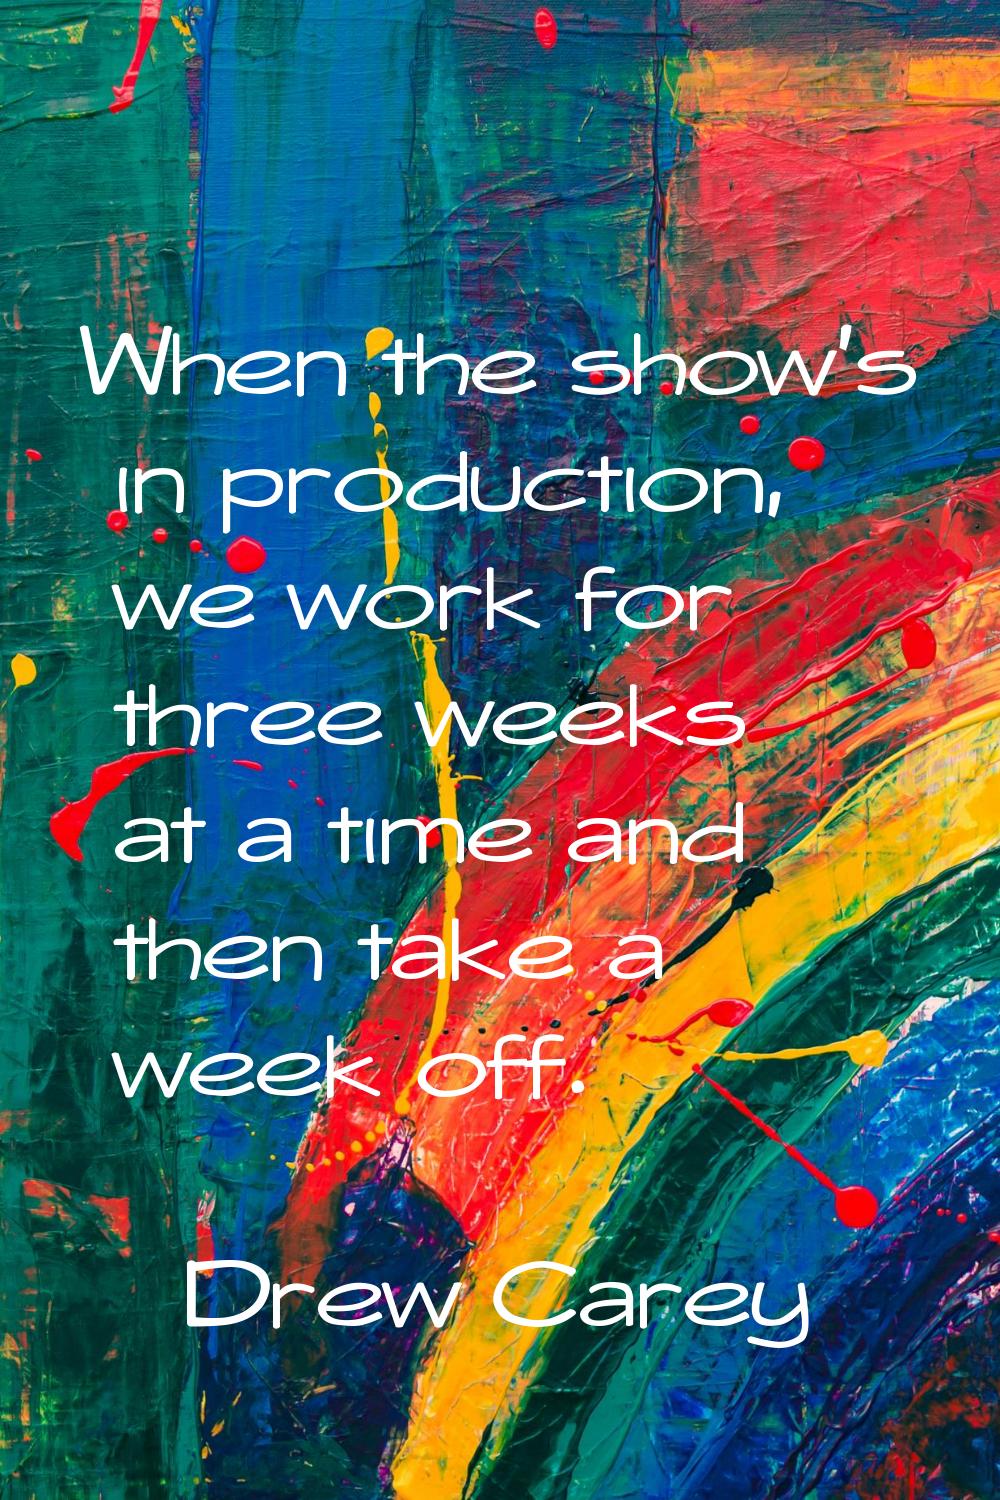 When the show's in production, we work for three weeks at a time and then take a week off.